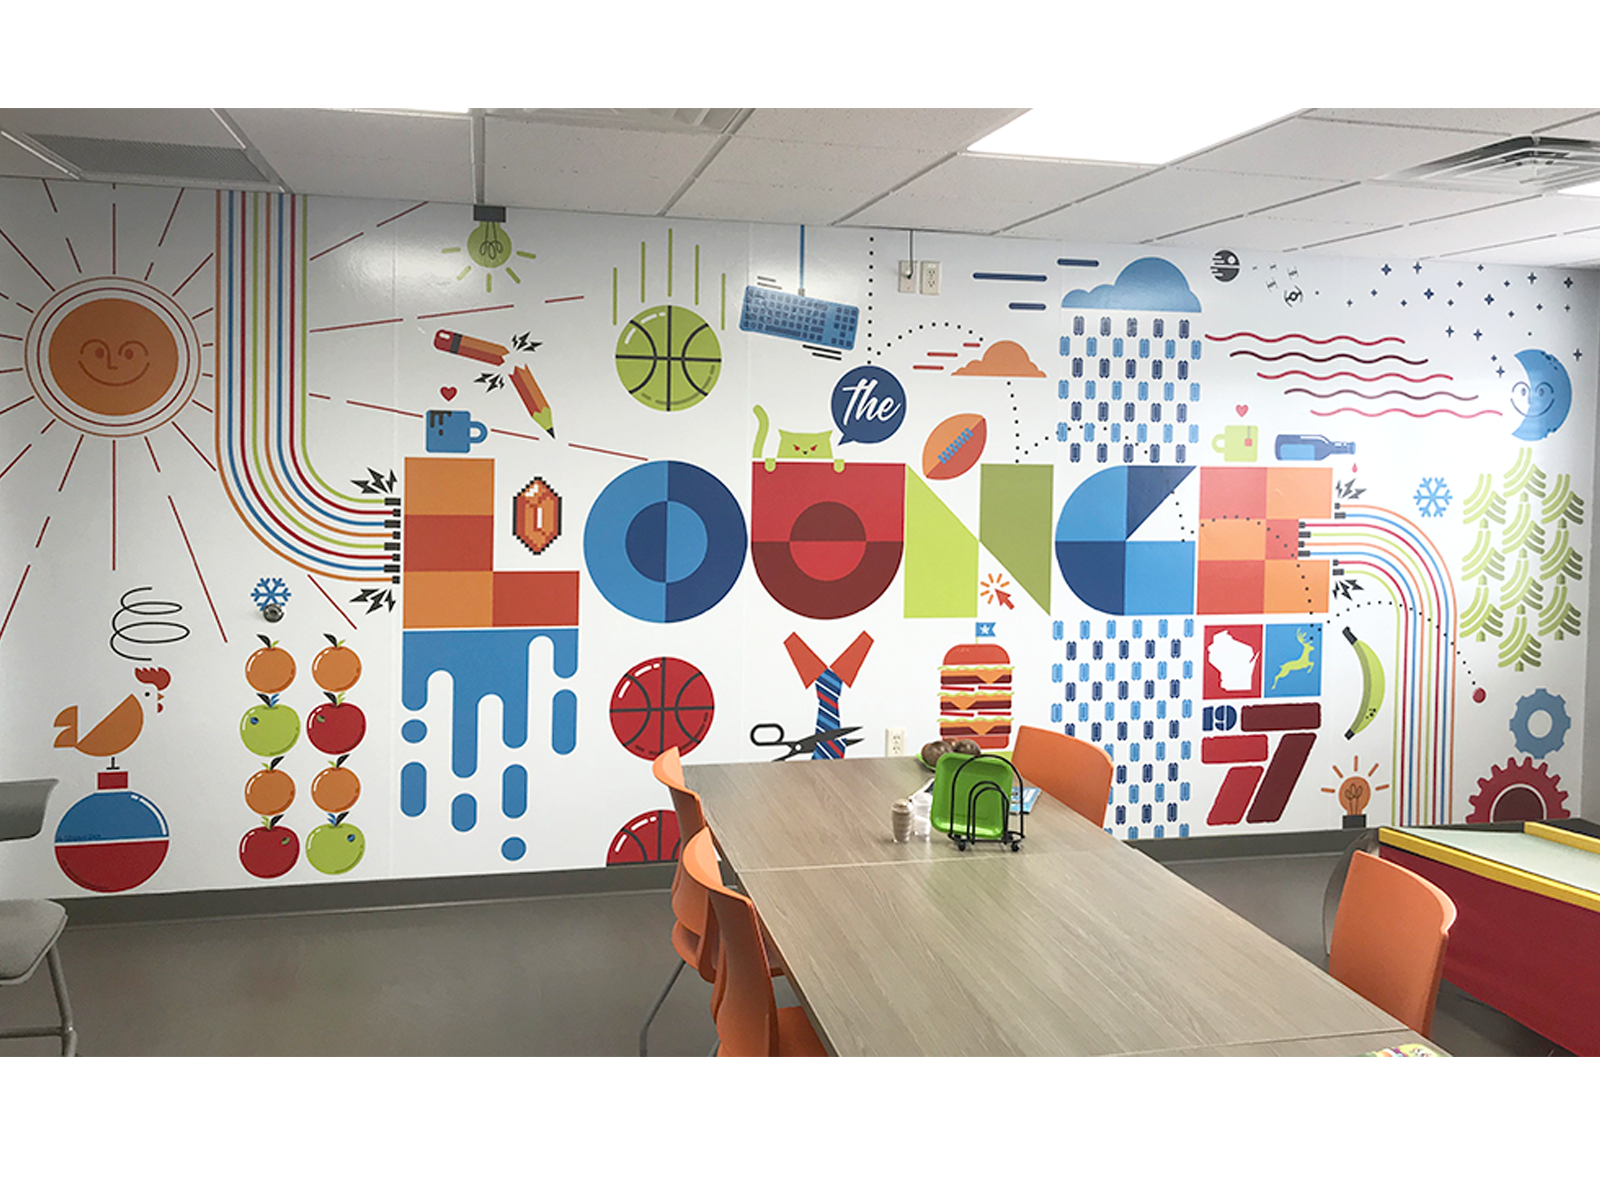 Bay Tek Entertainment Lounge Mural by Andrew Gerend on Dribbble